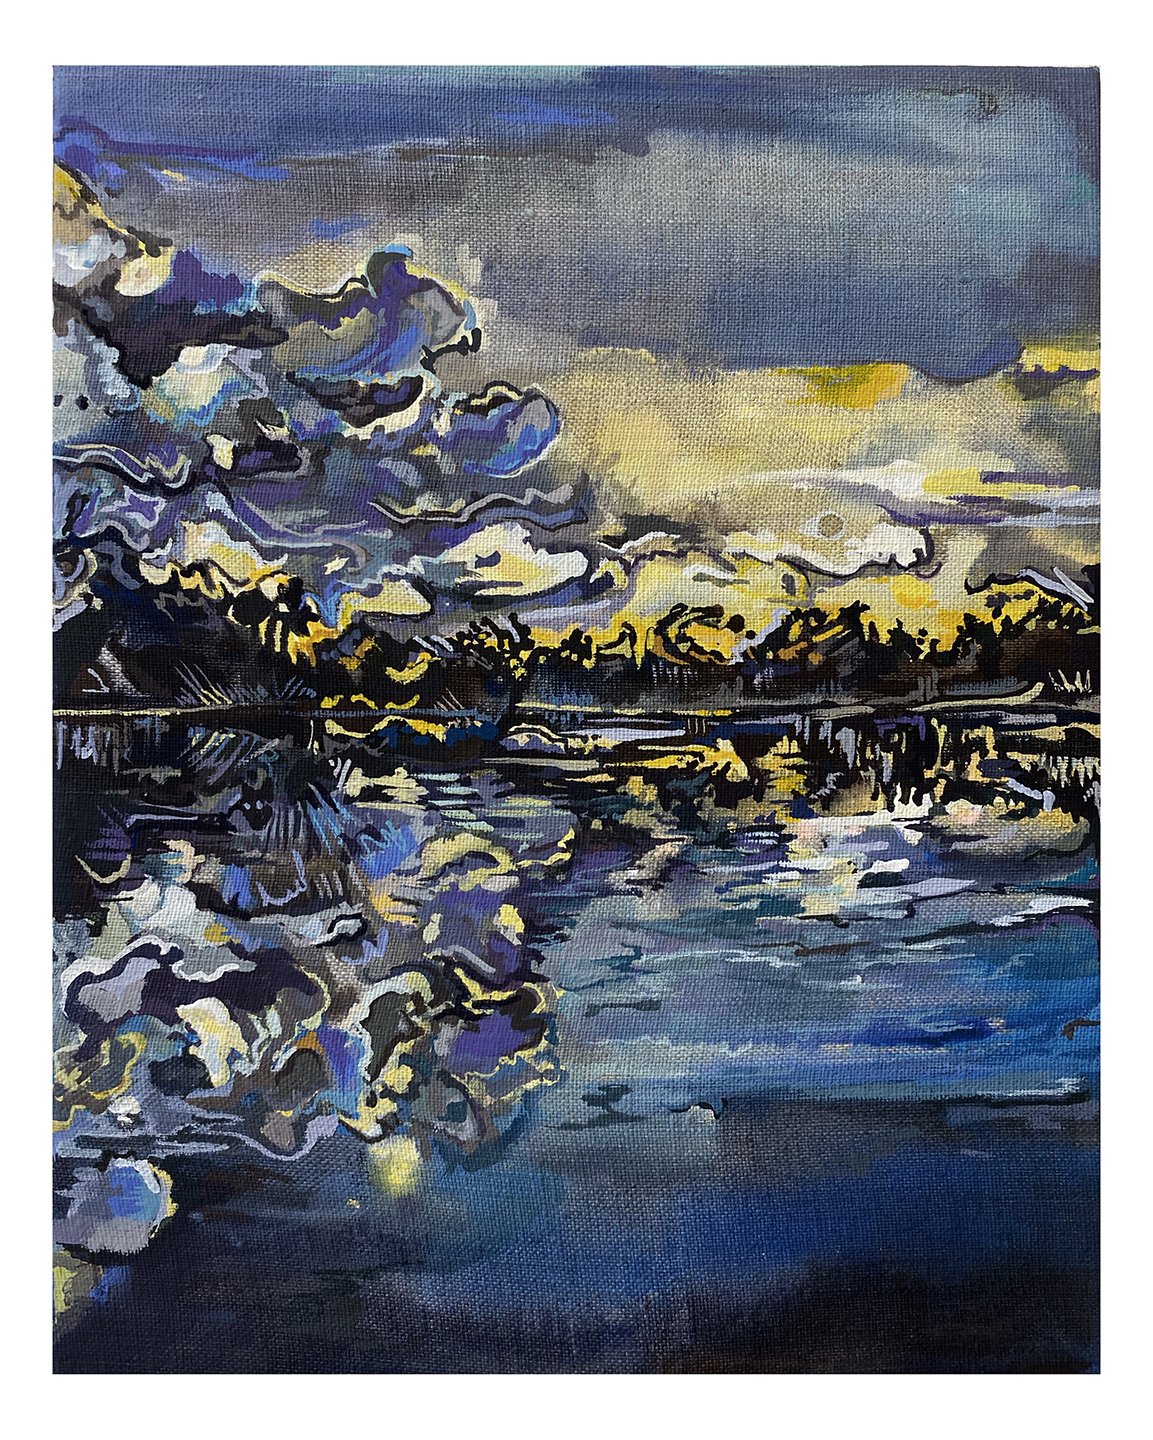  Maria Calandra, Visiting at Sunset on the Bayou, 2021, acrylic on linen over panel, 10 x 8 inches 